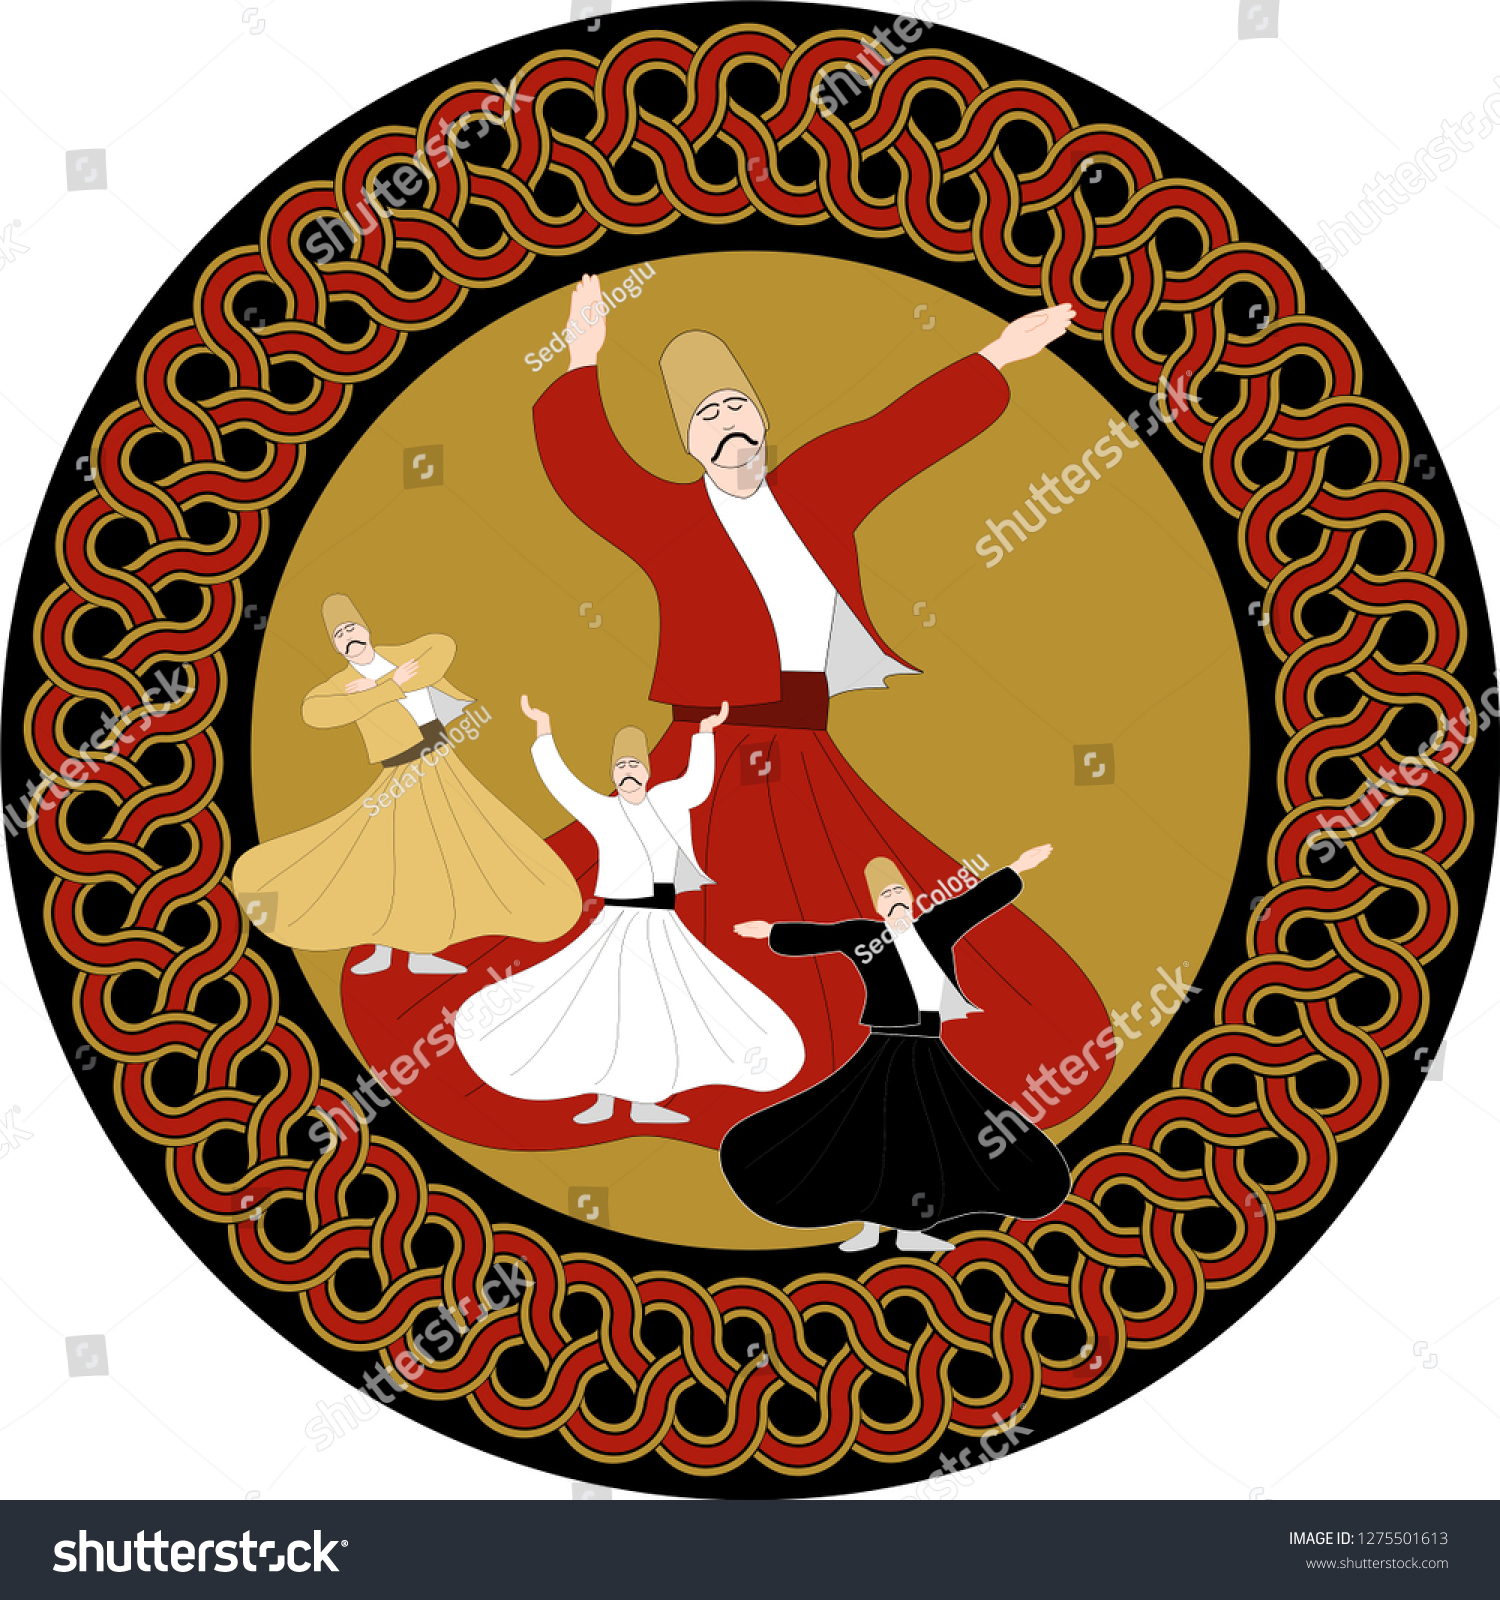 stock-vector-whirling-dervish-sufi-eps-format-vector-drawing-symbolic-study-of-mevlevi-mystical-dance-it-can-1275501613